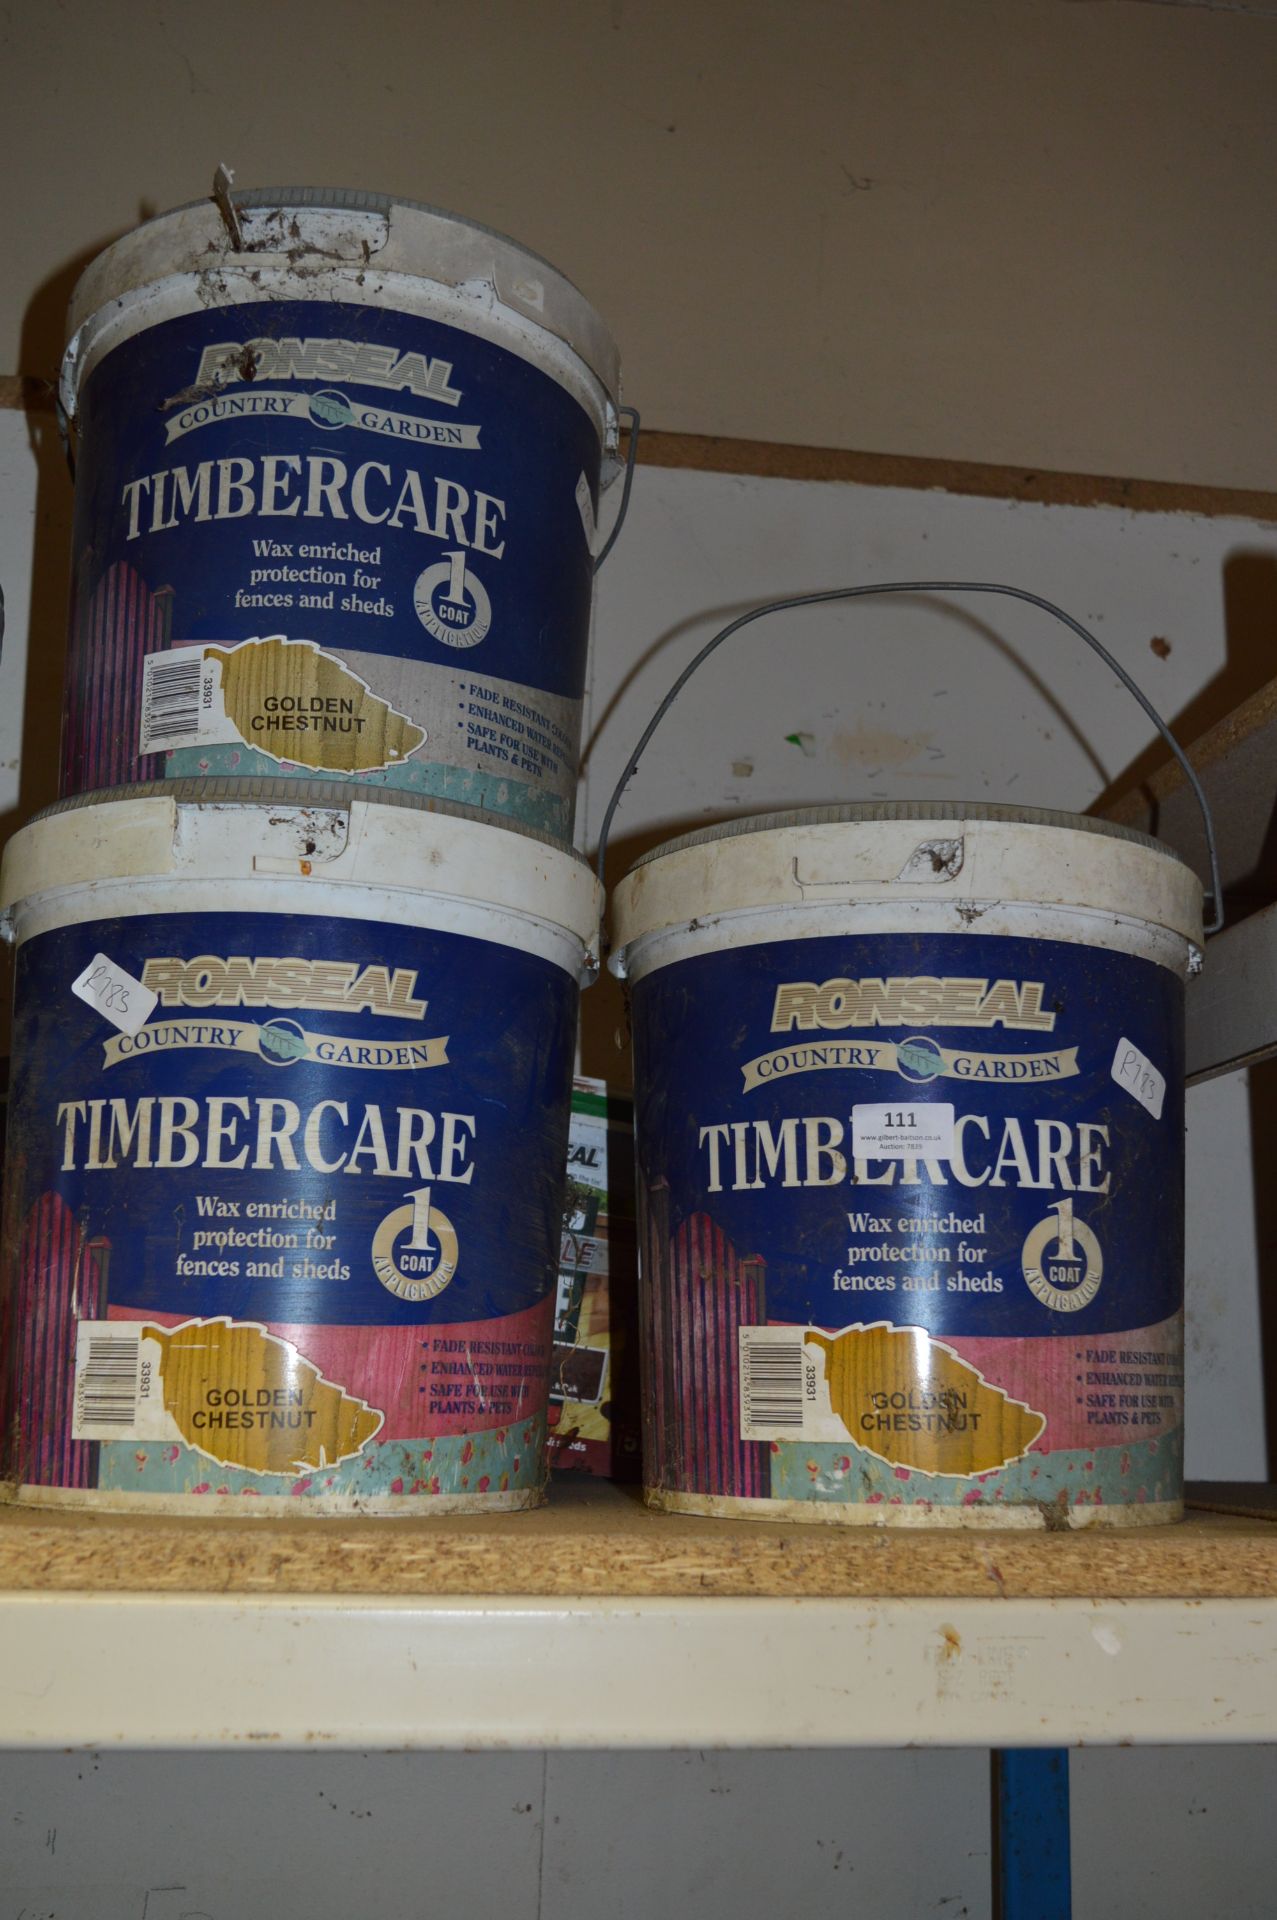 Three Tubs of Ronseal Timbercare (Golden Chestnut)